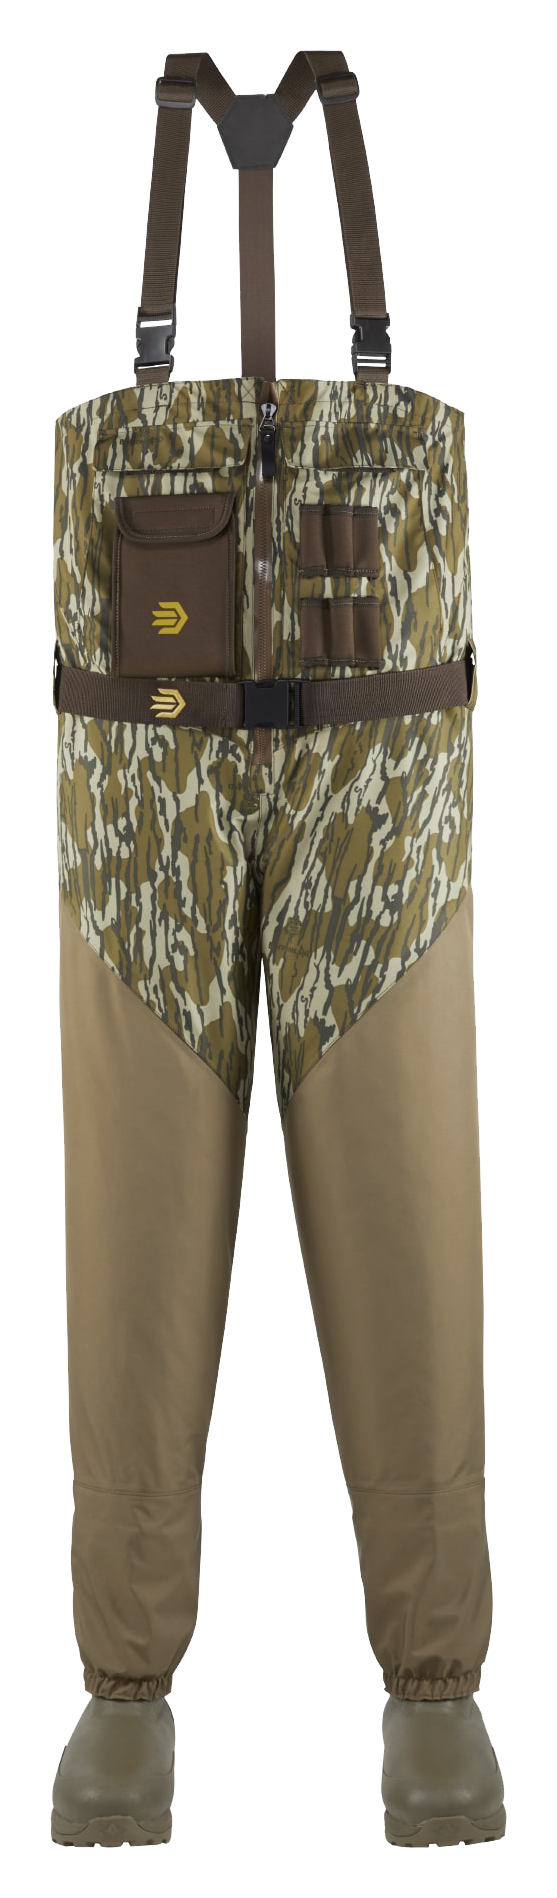 LaCrosse Alpha Agility Select Insulated Front-Zip Breathable Hunting Waders for Men - Mossy Oak Original Bottomland - 14/Medium